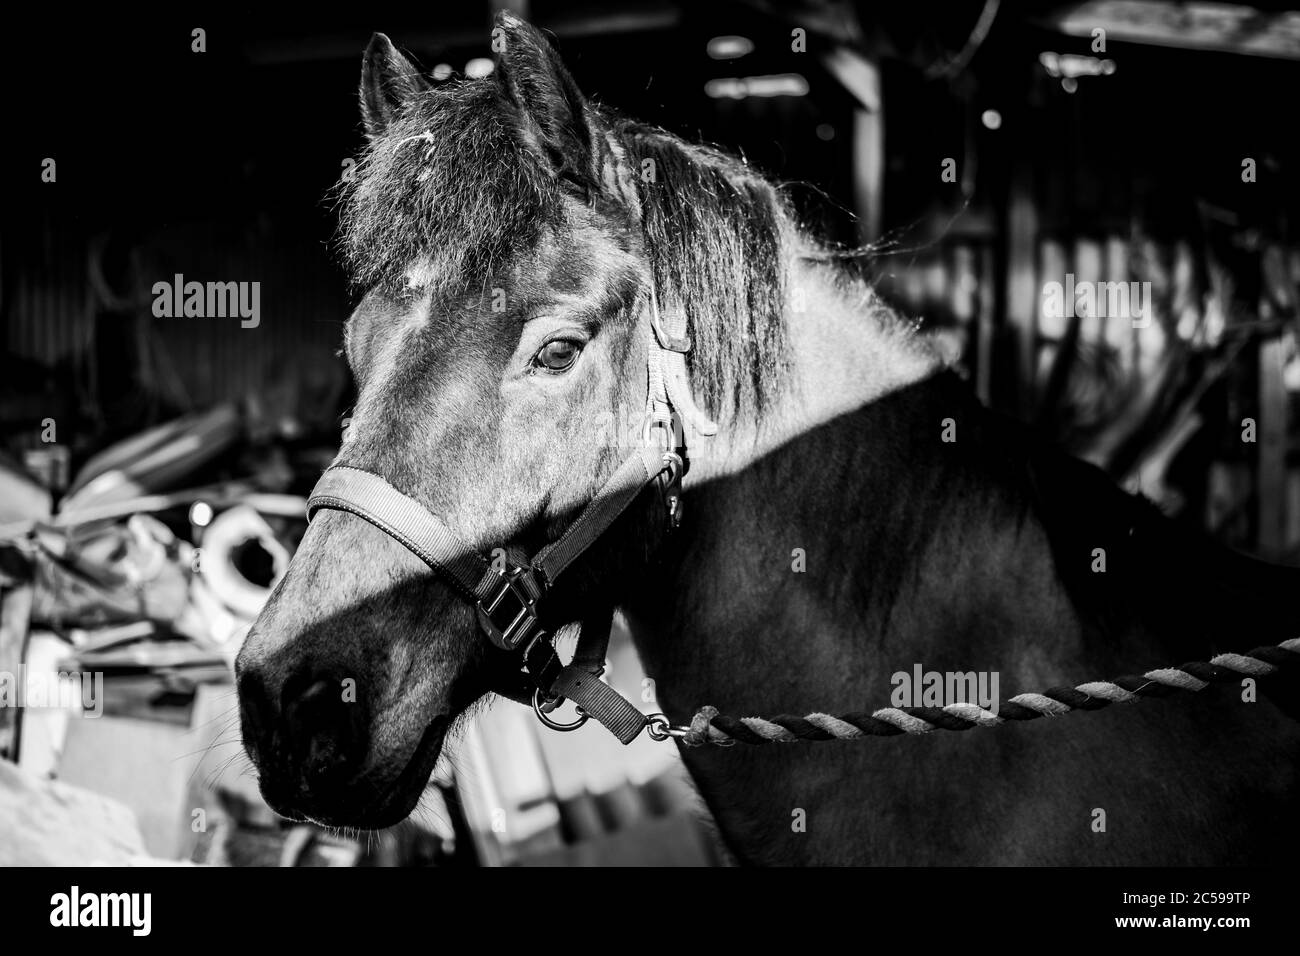 Monochrome view of a Pony seen tethered by rope to the outside of his stable. Heavily contrasted with shadow to bring out the detail. Stock Photo